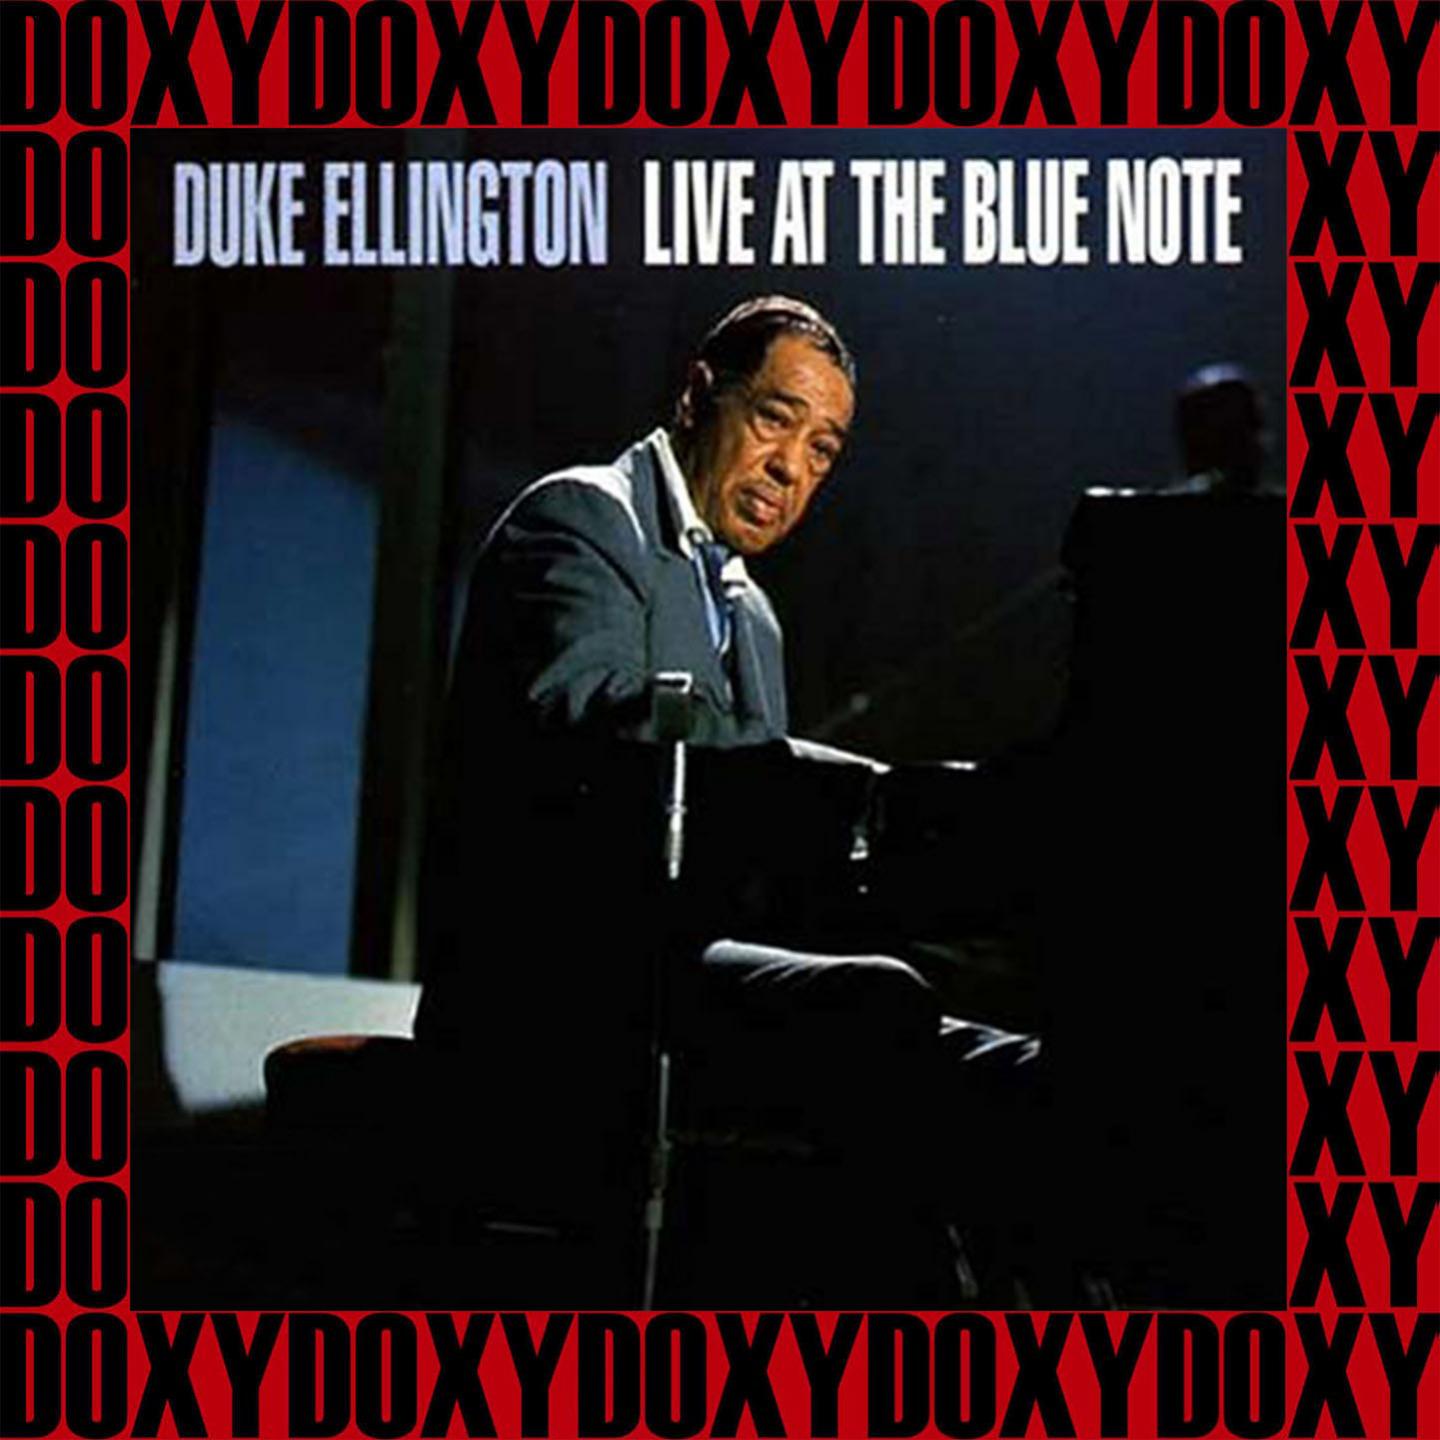 Live At The Blue Note, 1959 (Expanded, Remastered Version) (Doxy Collection)